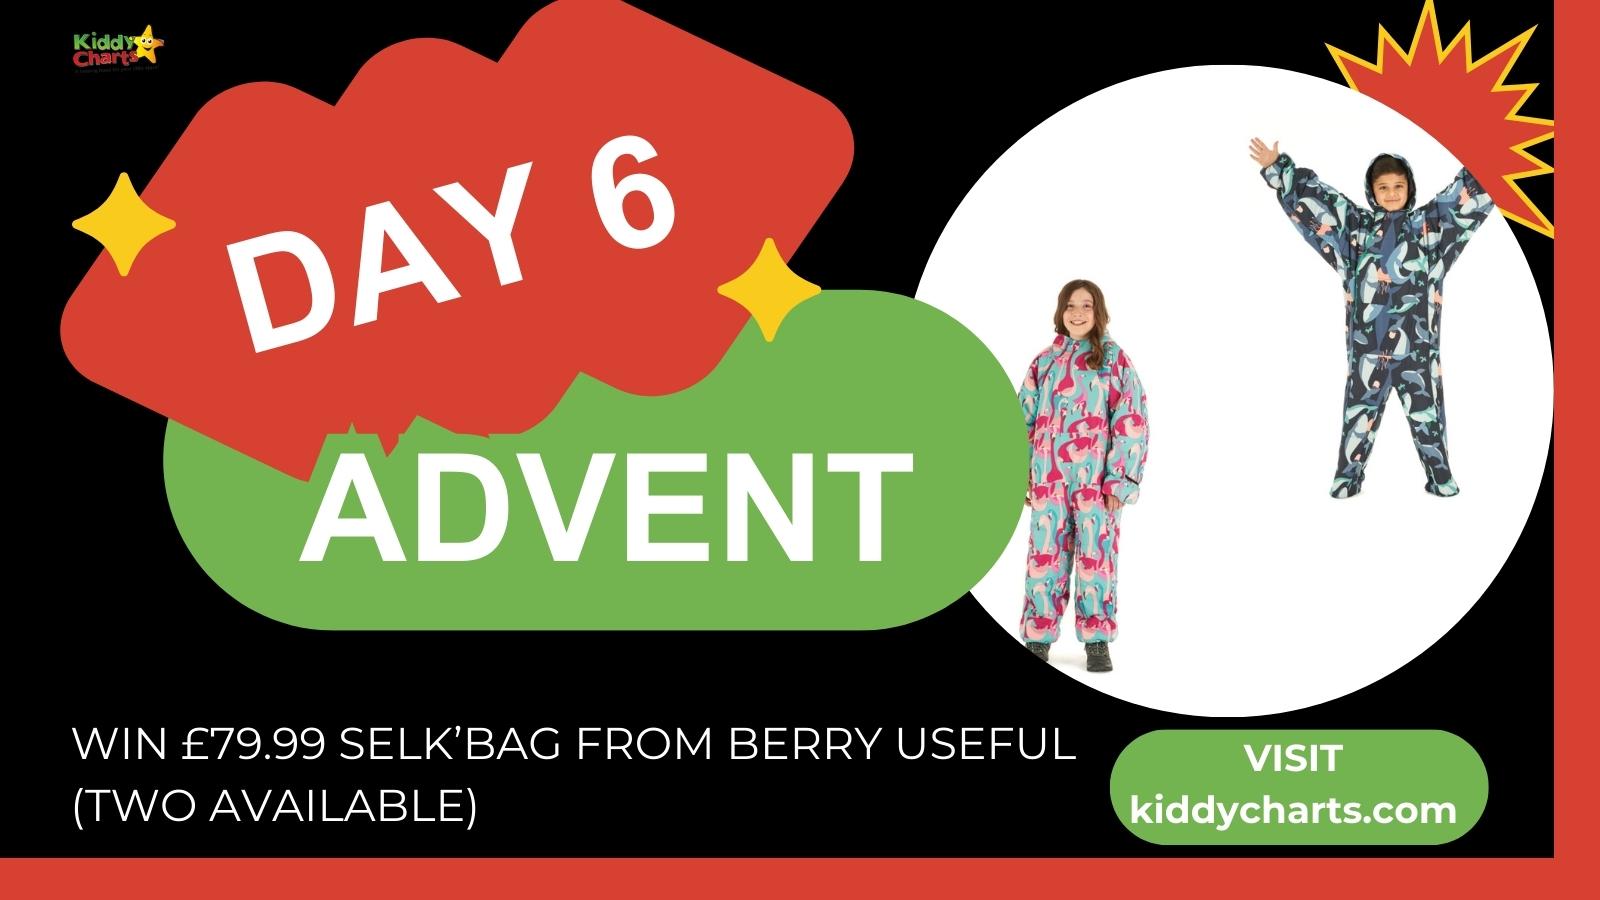 Win a £79.99 Selk’bag wearable sleeping bag for a cosy Christmas (Two available) #KiddyChartsAdvent